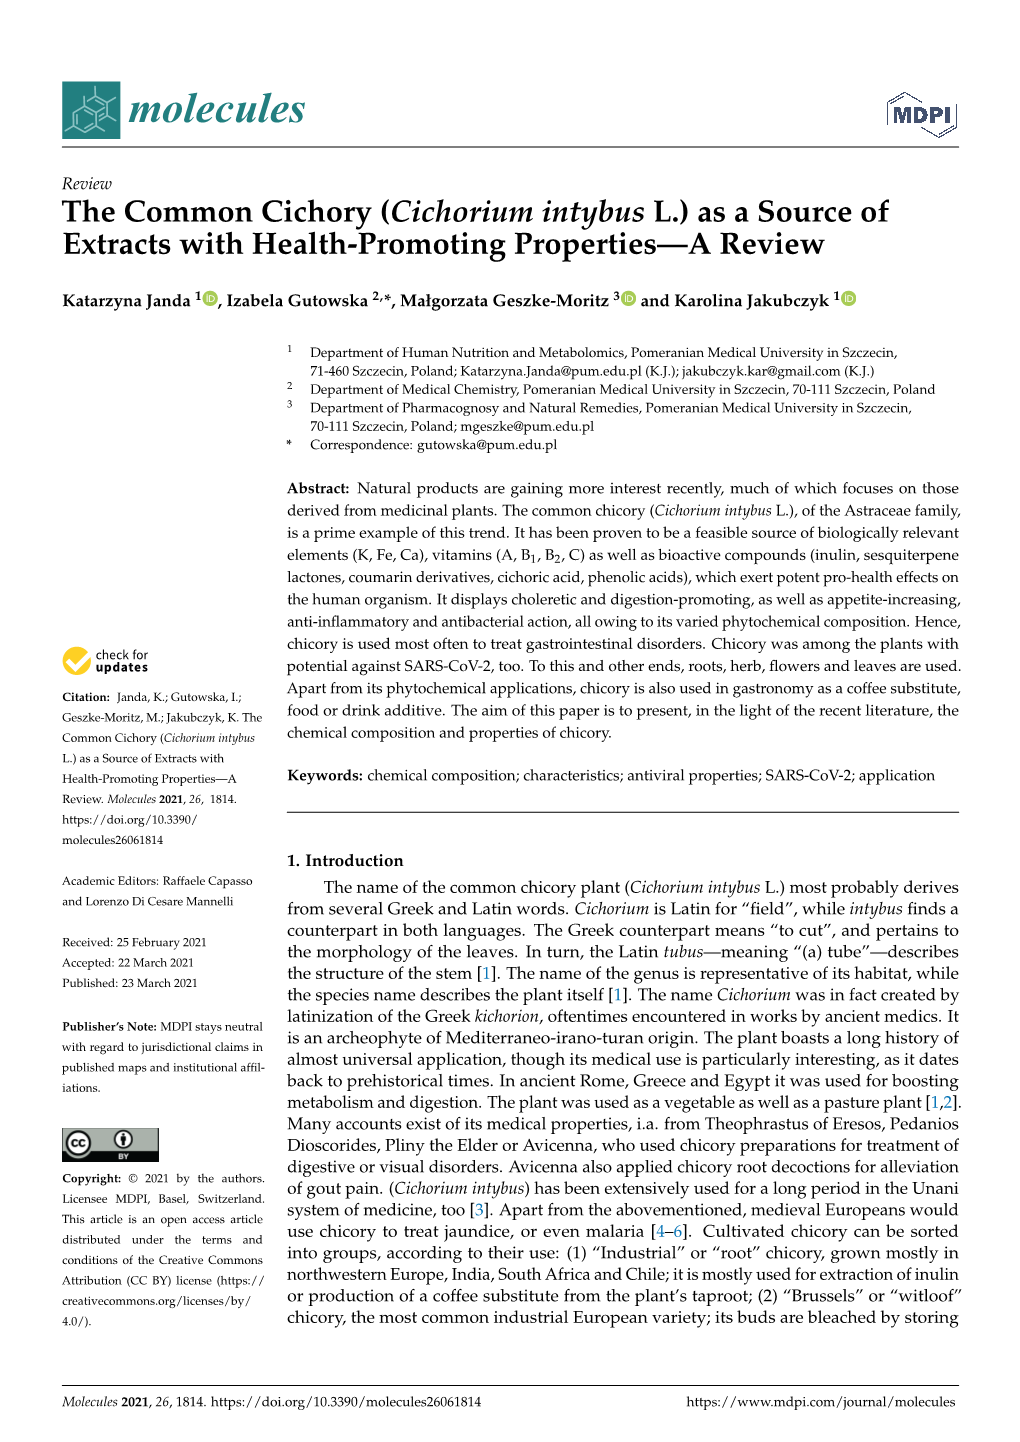 Cichorium Intybus L.) As a Source of Extracts with Health-Promoting Properties—A Review